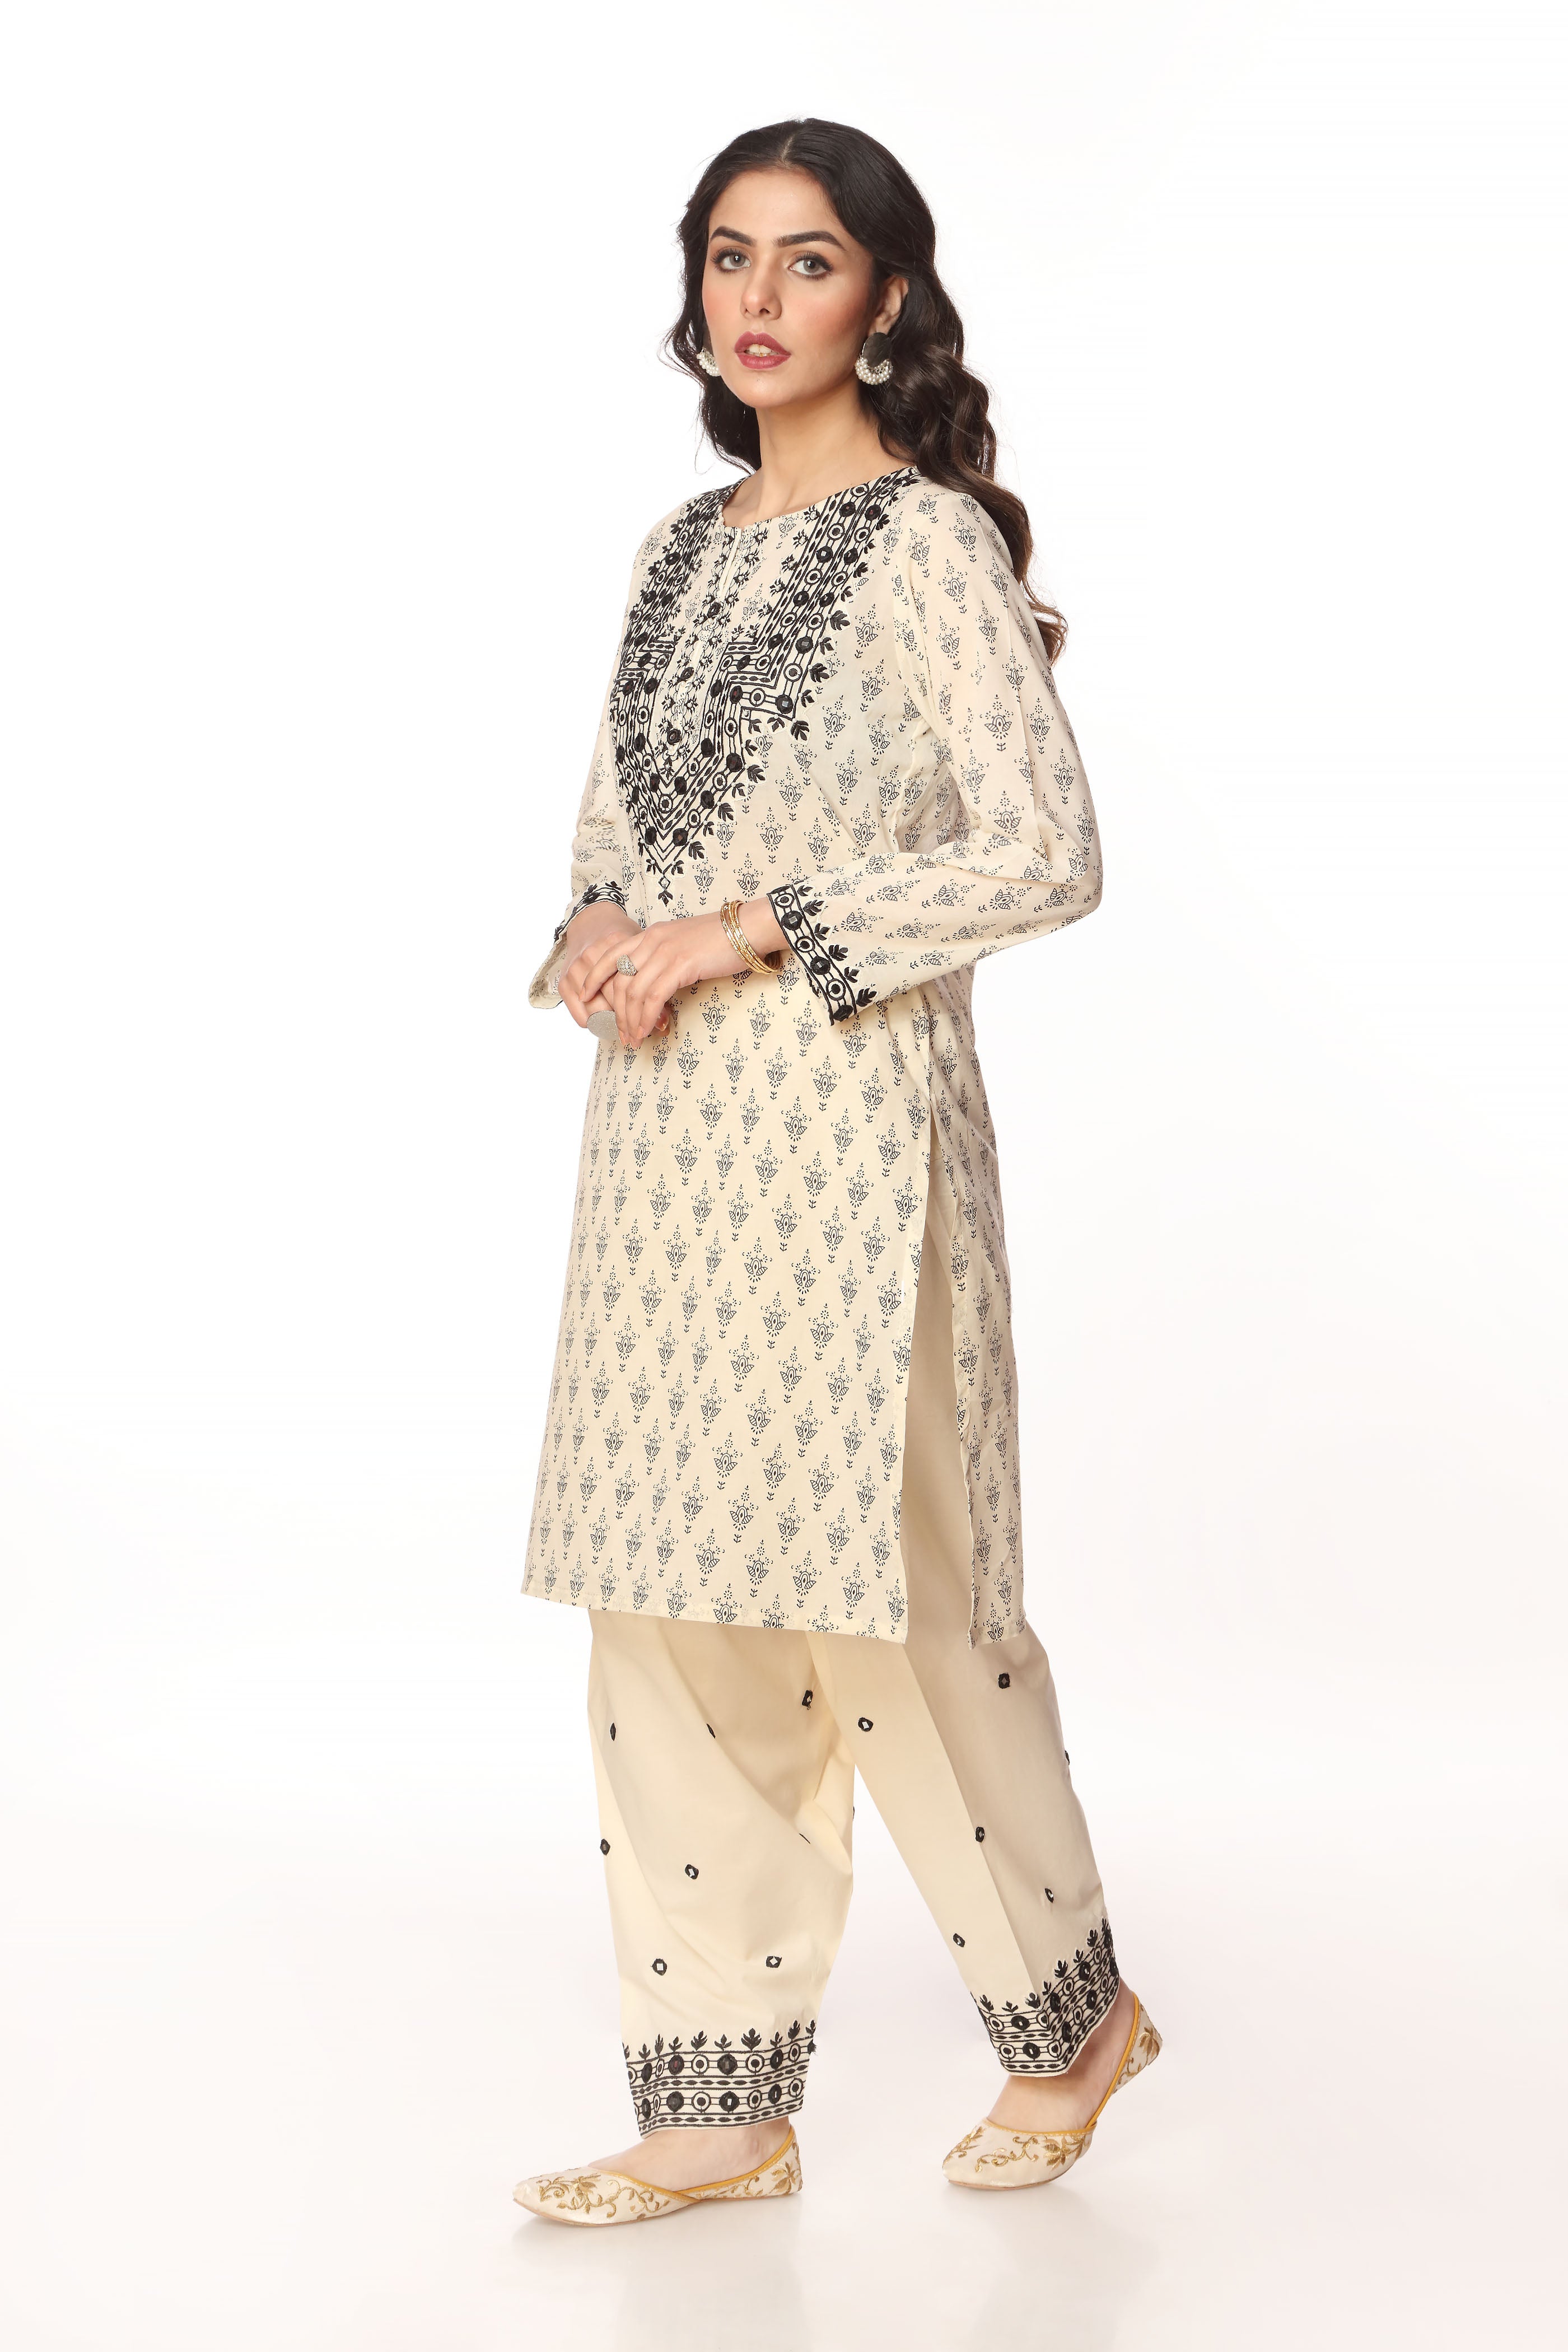 Monocrome Sheesha in Off White coloured Printed Lawn fabric 2